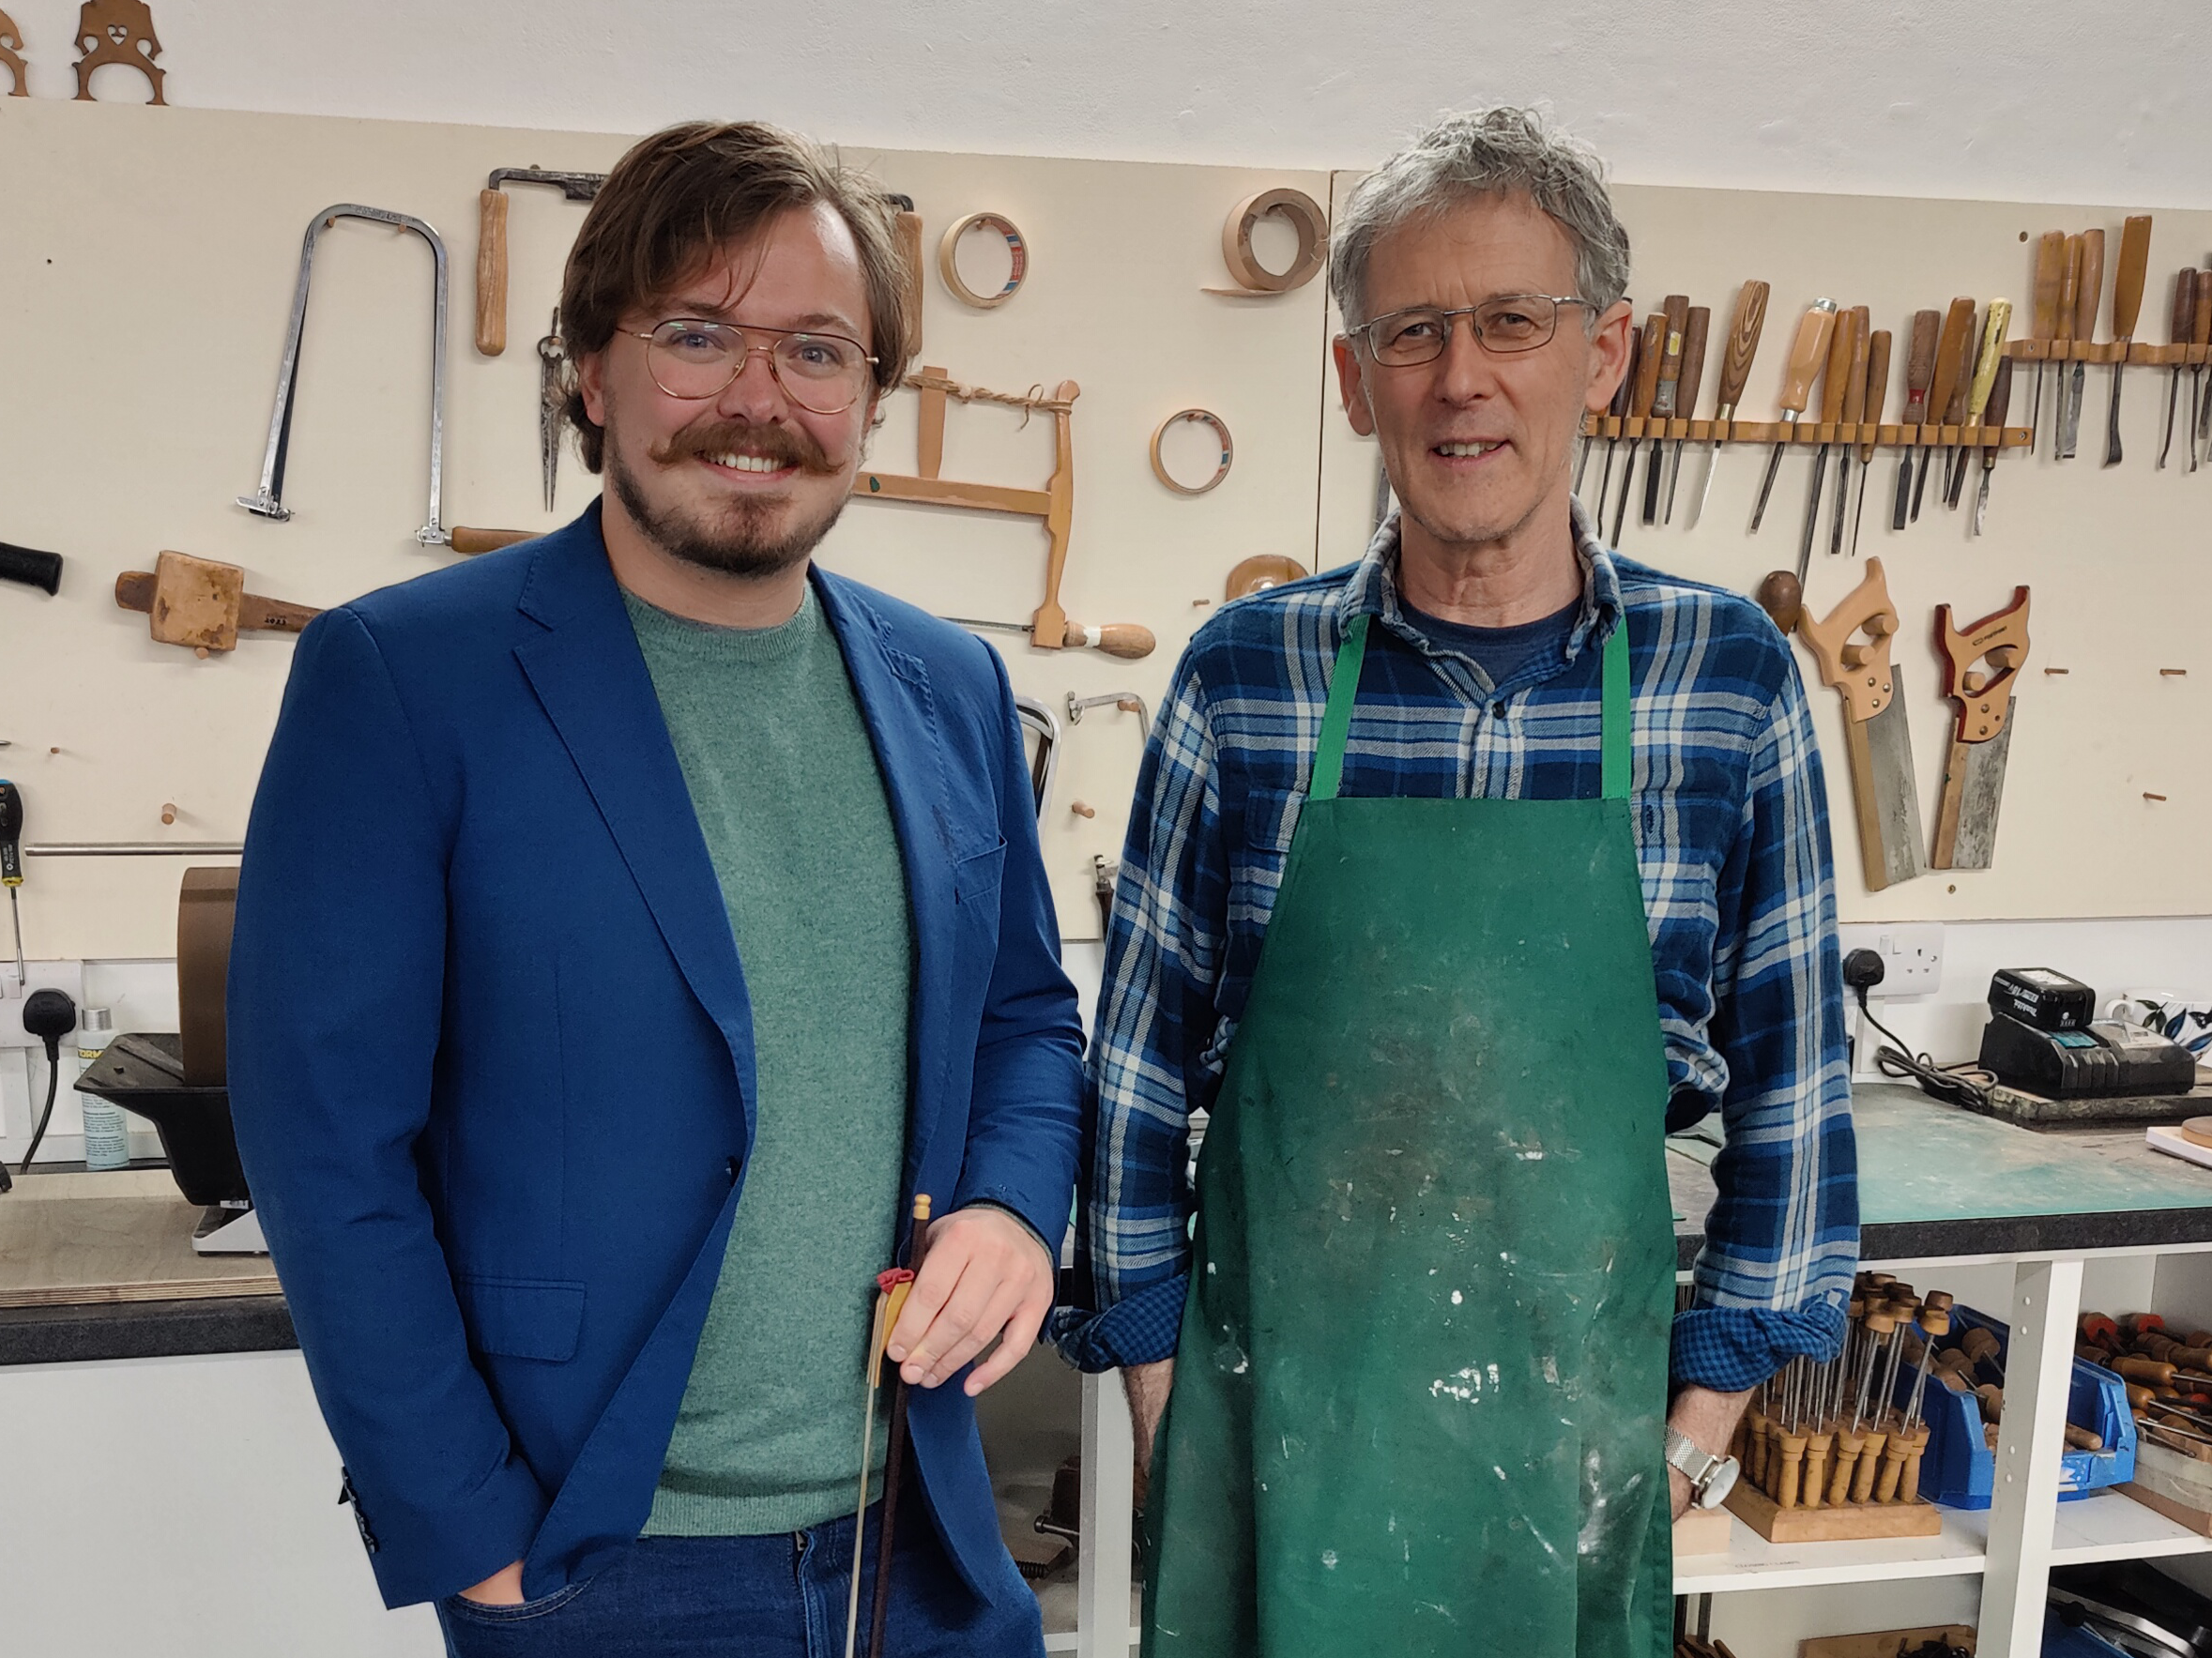 Image of two men – Fraser and Shem – stood next to each other in a workshop with tools behind them. Both are smiling.